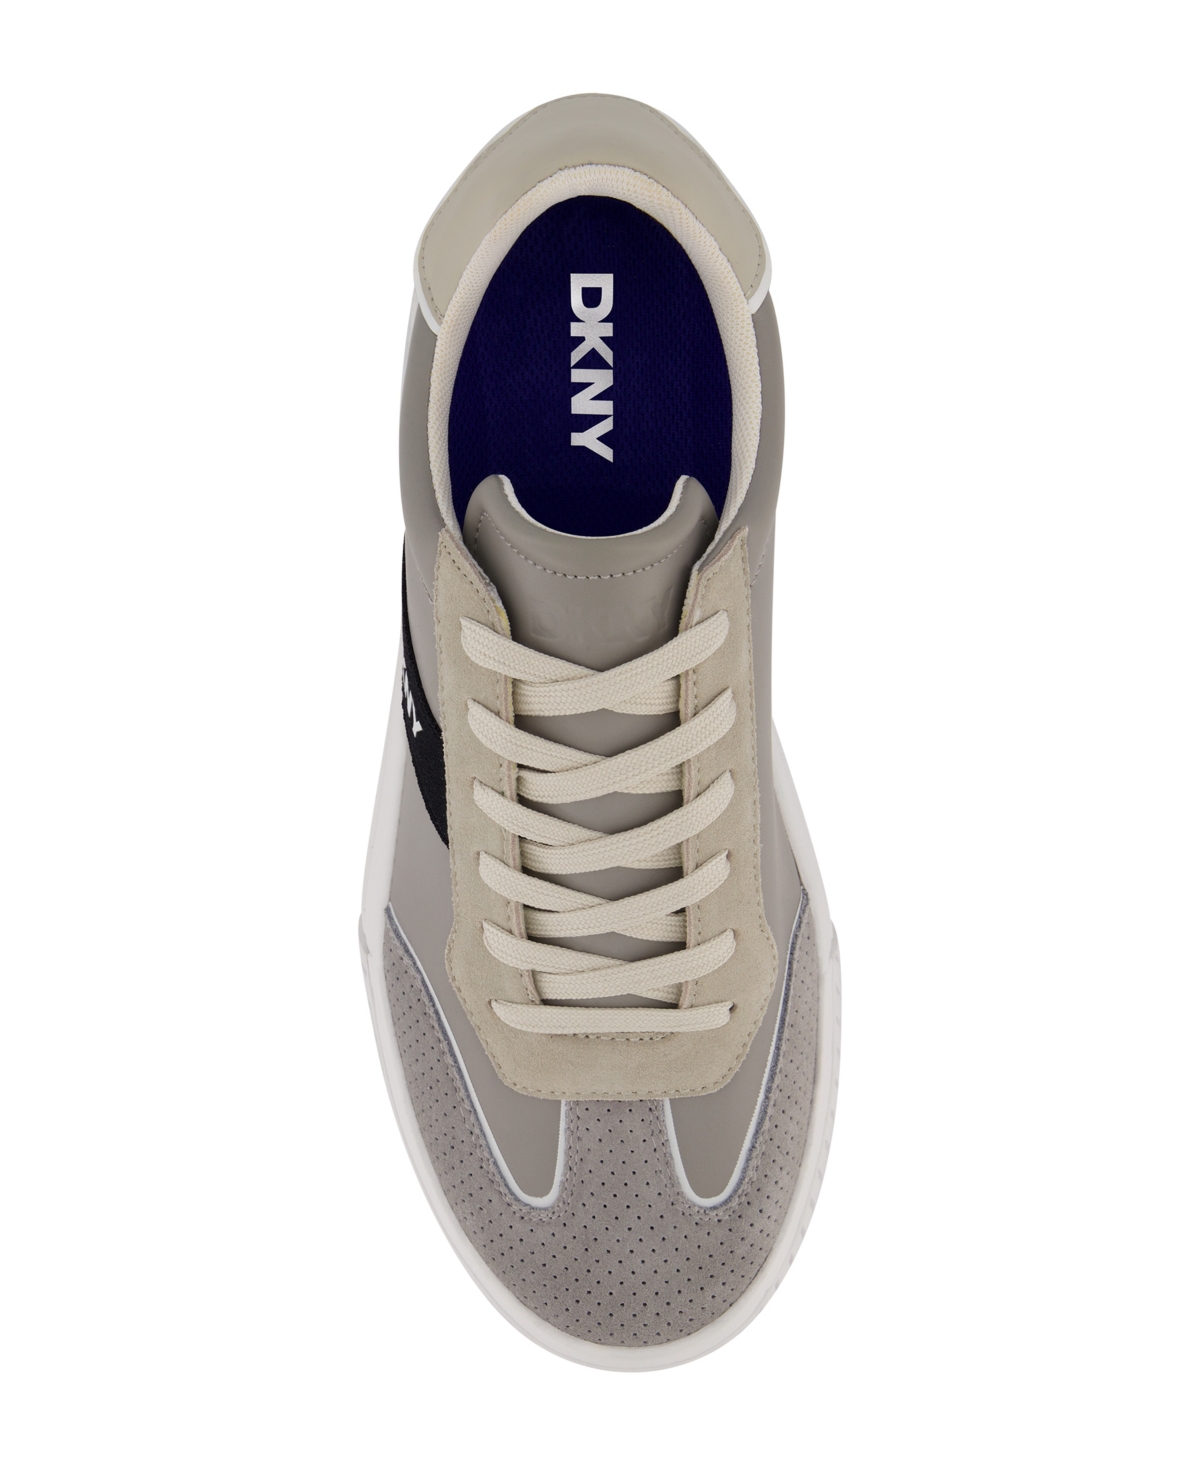 Shop Dkny Men's Side Logo Perforated Two Tone Branded Sole Racer Toe Sneakers In Grey